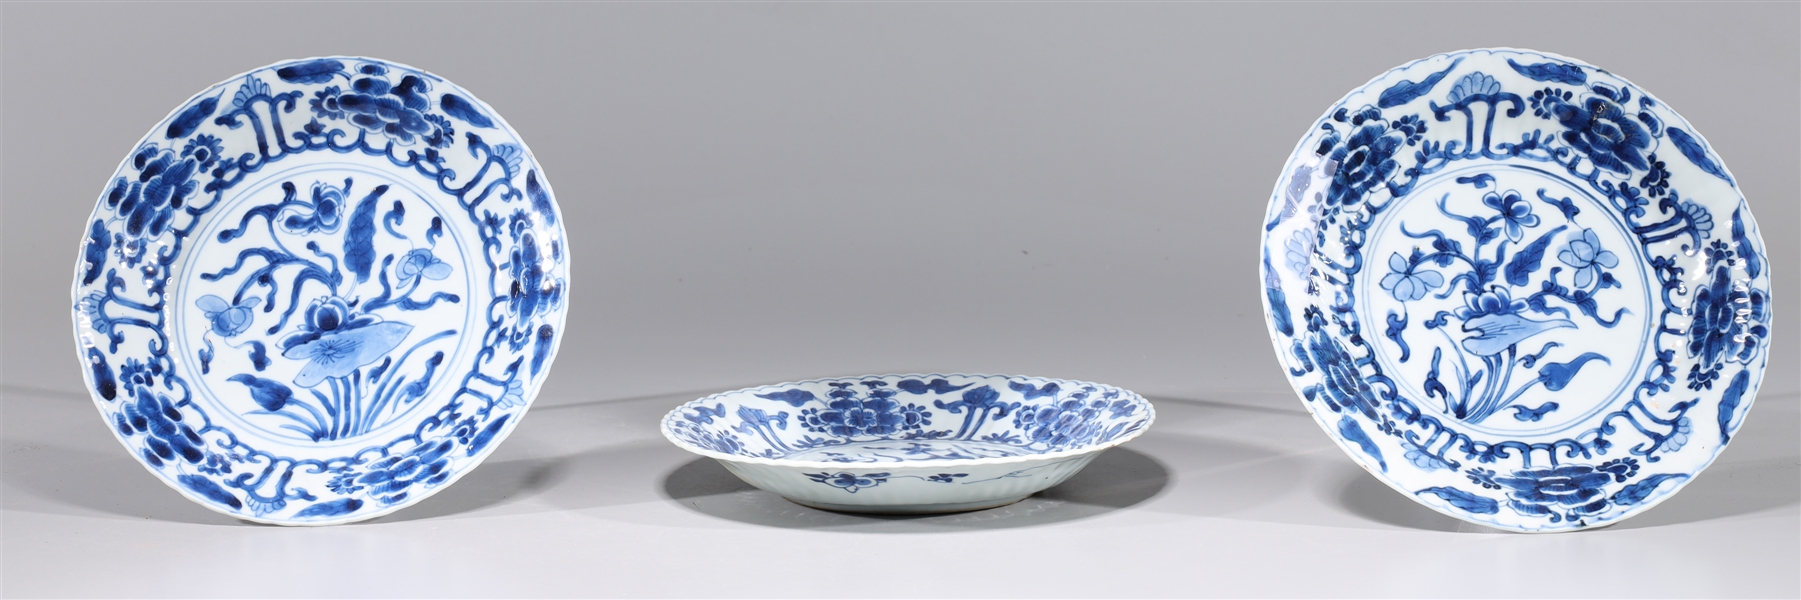 Three antique Chinese blue and white